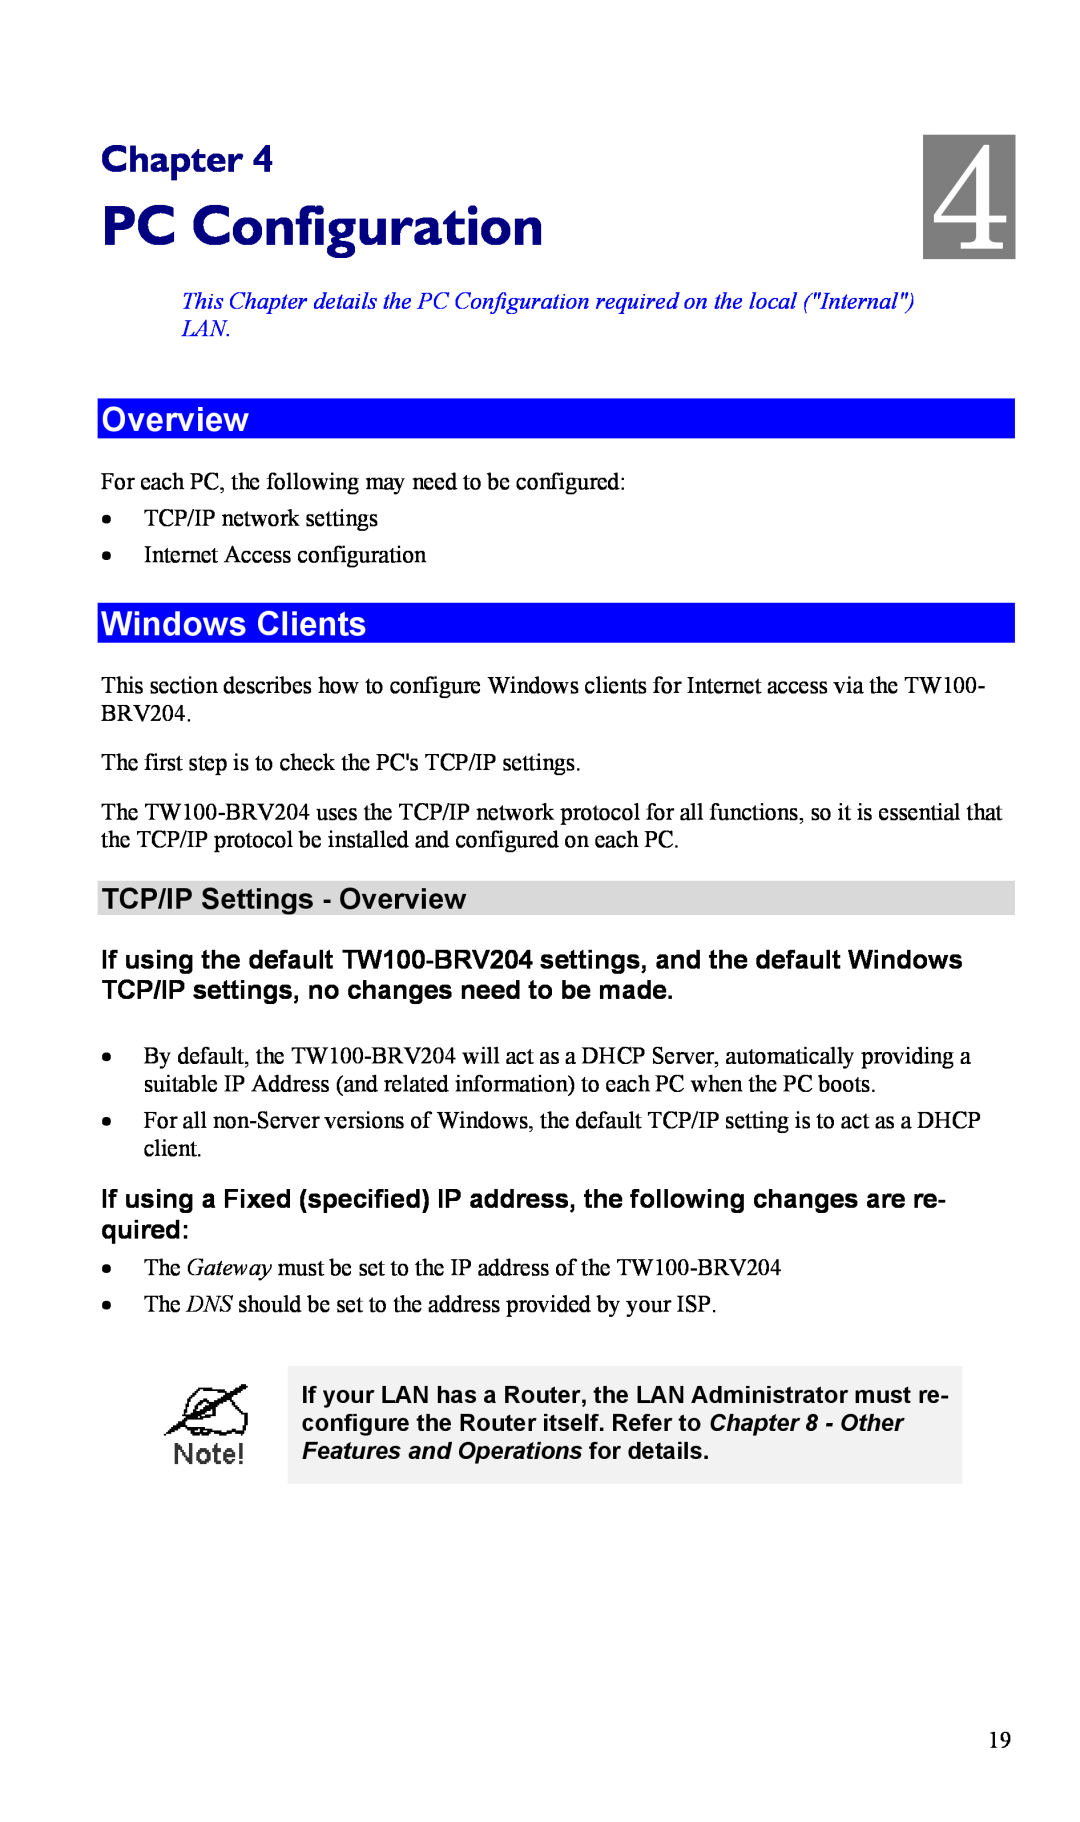 TRENDnet TW100-BRV204, VPN Firewall Router manual PC Configuration, Windows Clients, TCP/IP Settings - Overview, Chapter 